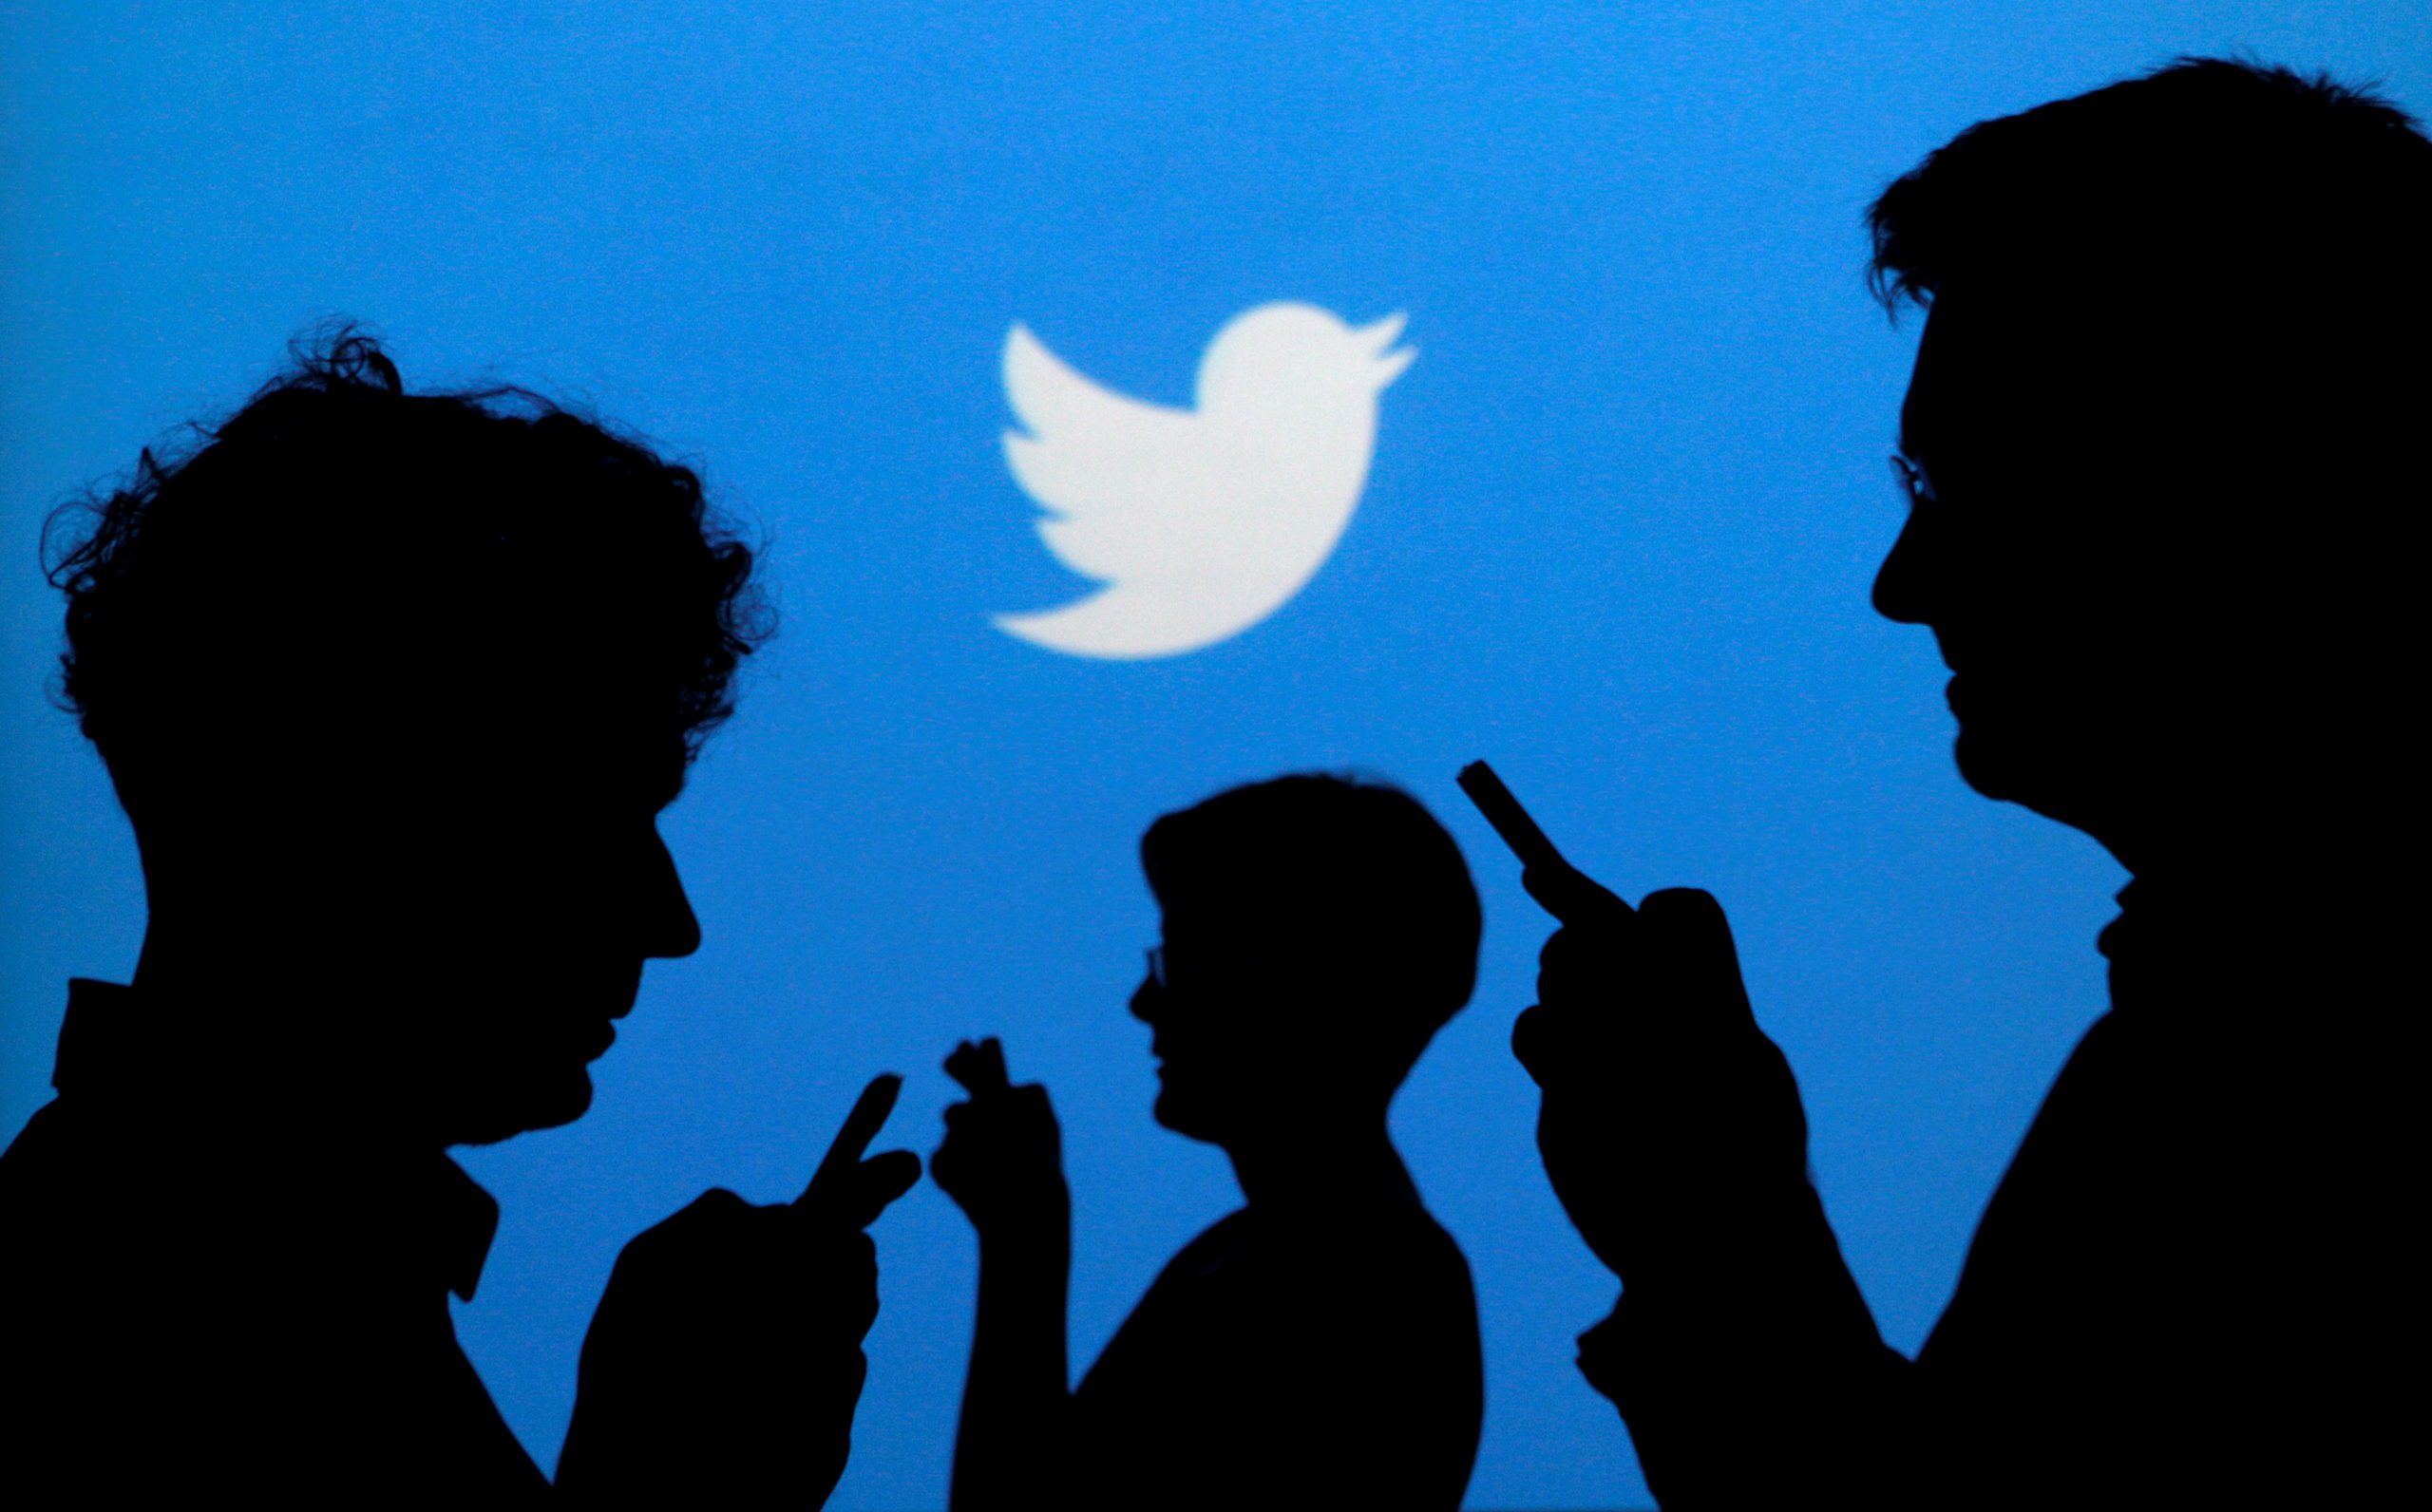 FILE PHOTO: People holding mobile phones are silhouetted against a backdrop projected with the Twitter logo in this illustration picture taken in  Warsaw September 27, 2013.  REUTERS/Kacper Pempel/File Photo - RC2DKO9UQOLM